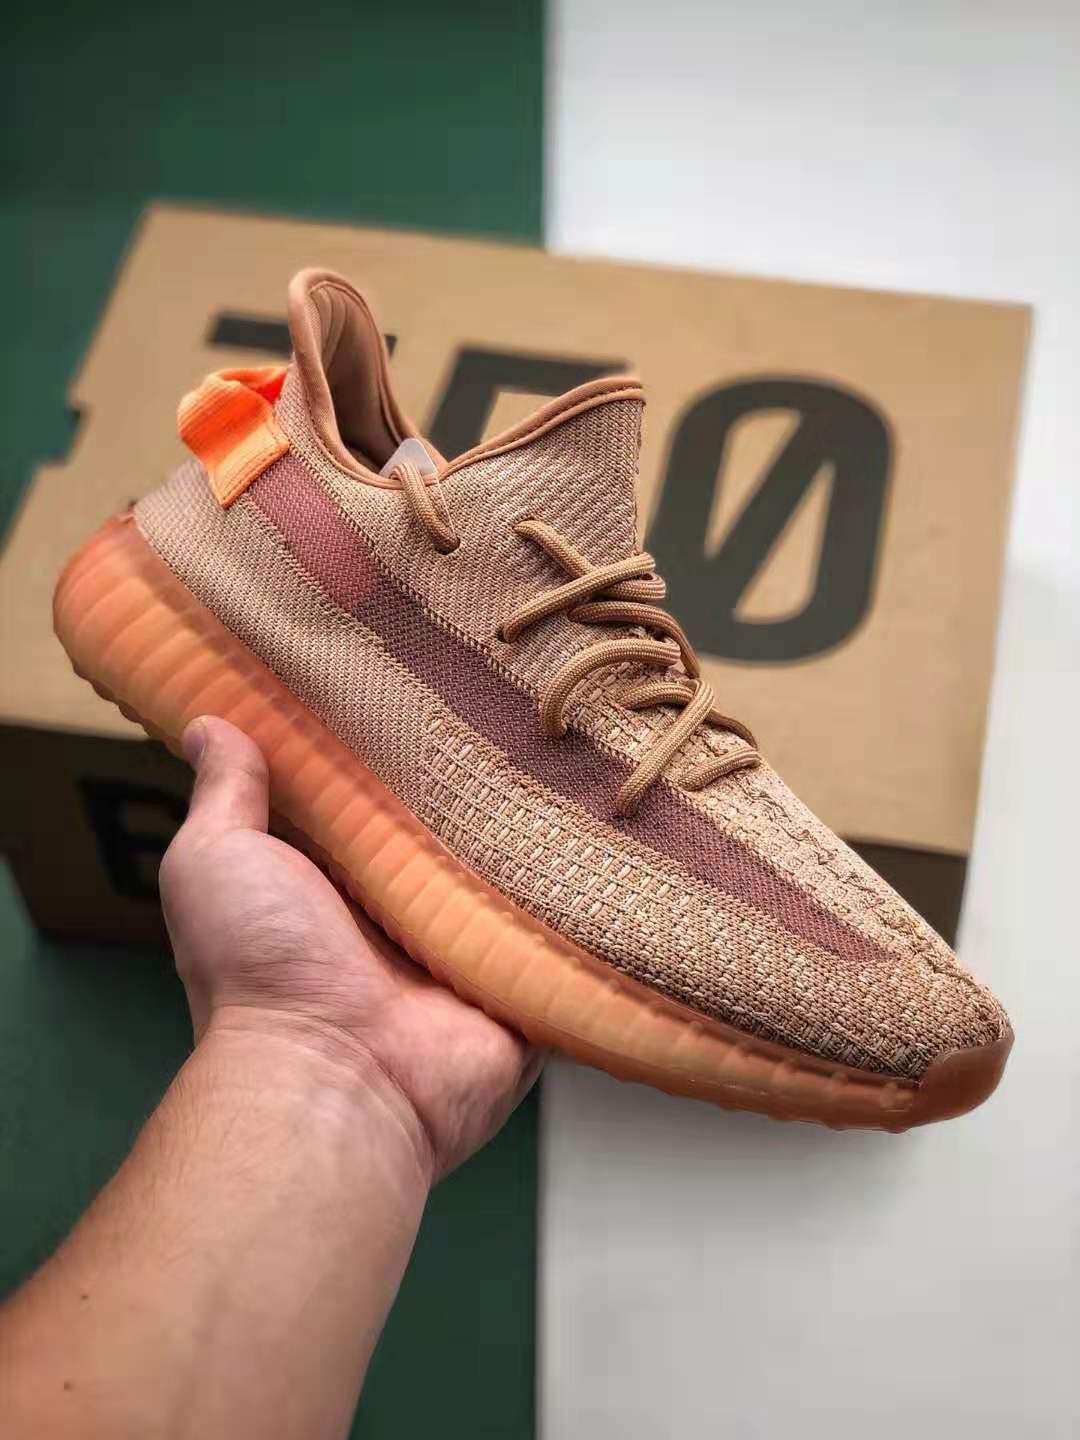 Adidas Yeezy Boost 350 V2 'Clay' EG7490 - Stylish and Comfortable Sneakers